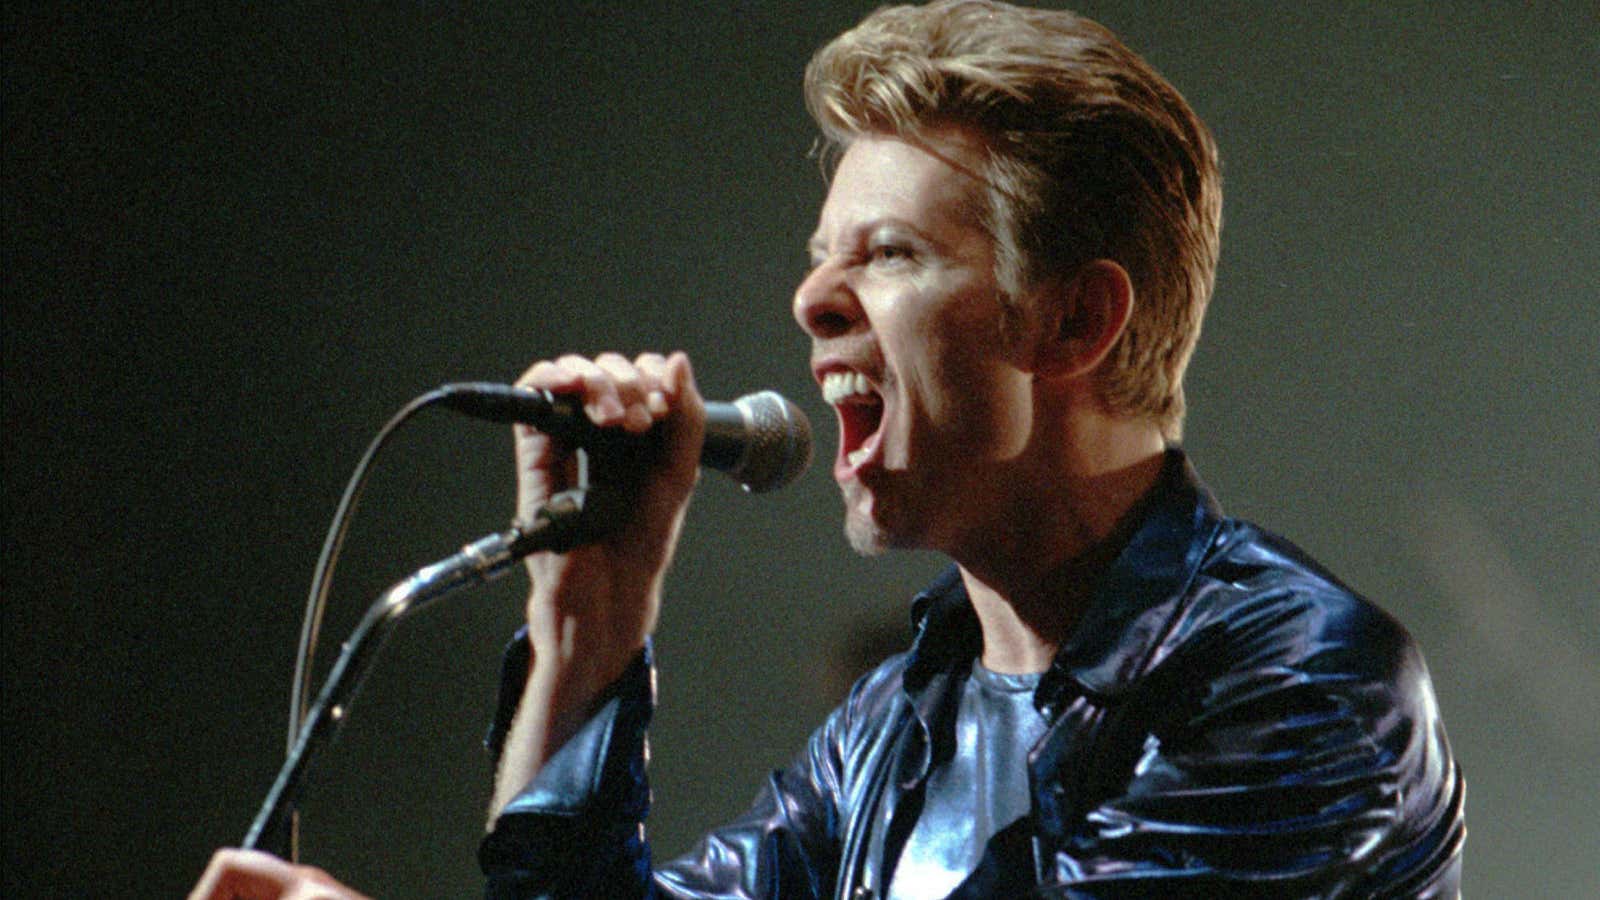 Bowie in 1995.